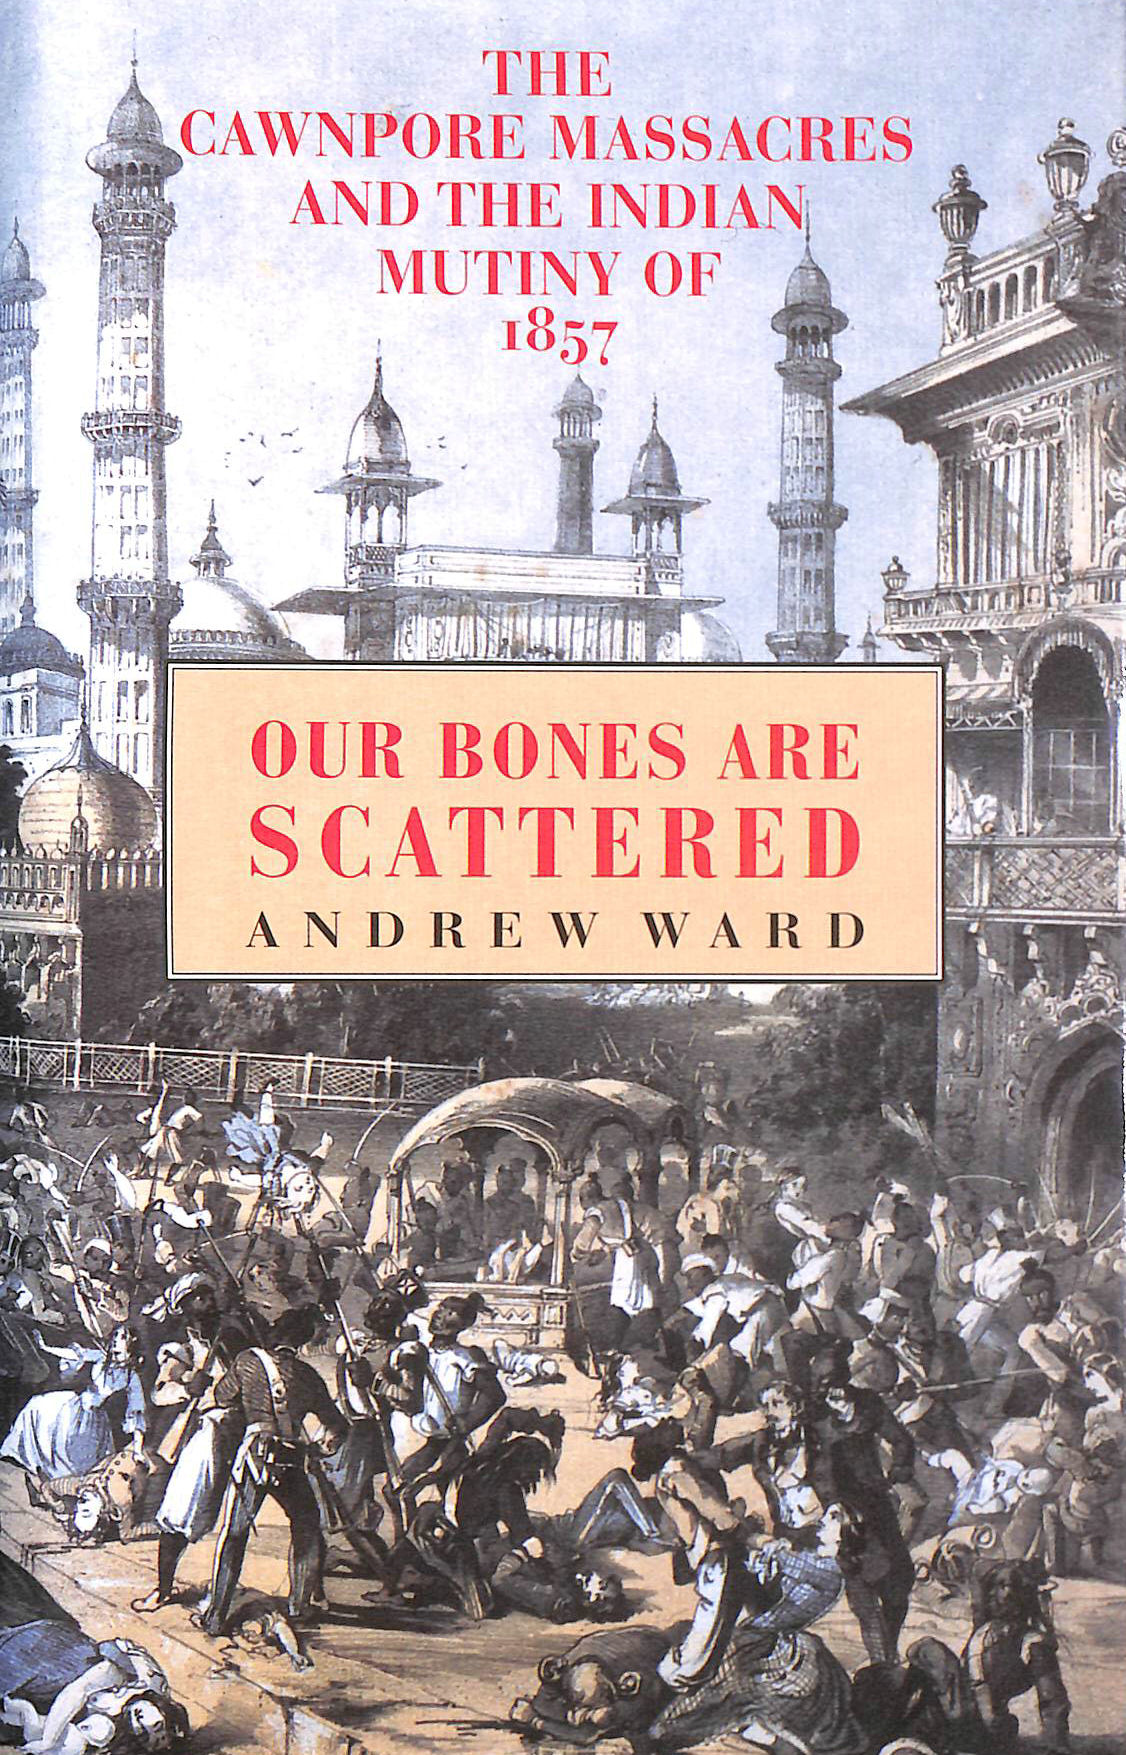 WARD, ANDREW - Our Bones Are Scattered: Cawnpore Massacres and the Indian Mutiny of 1857